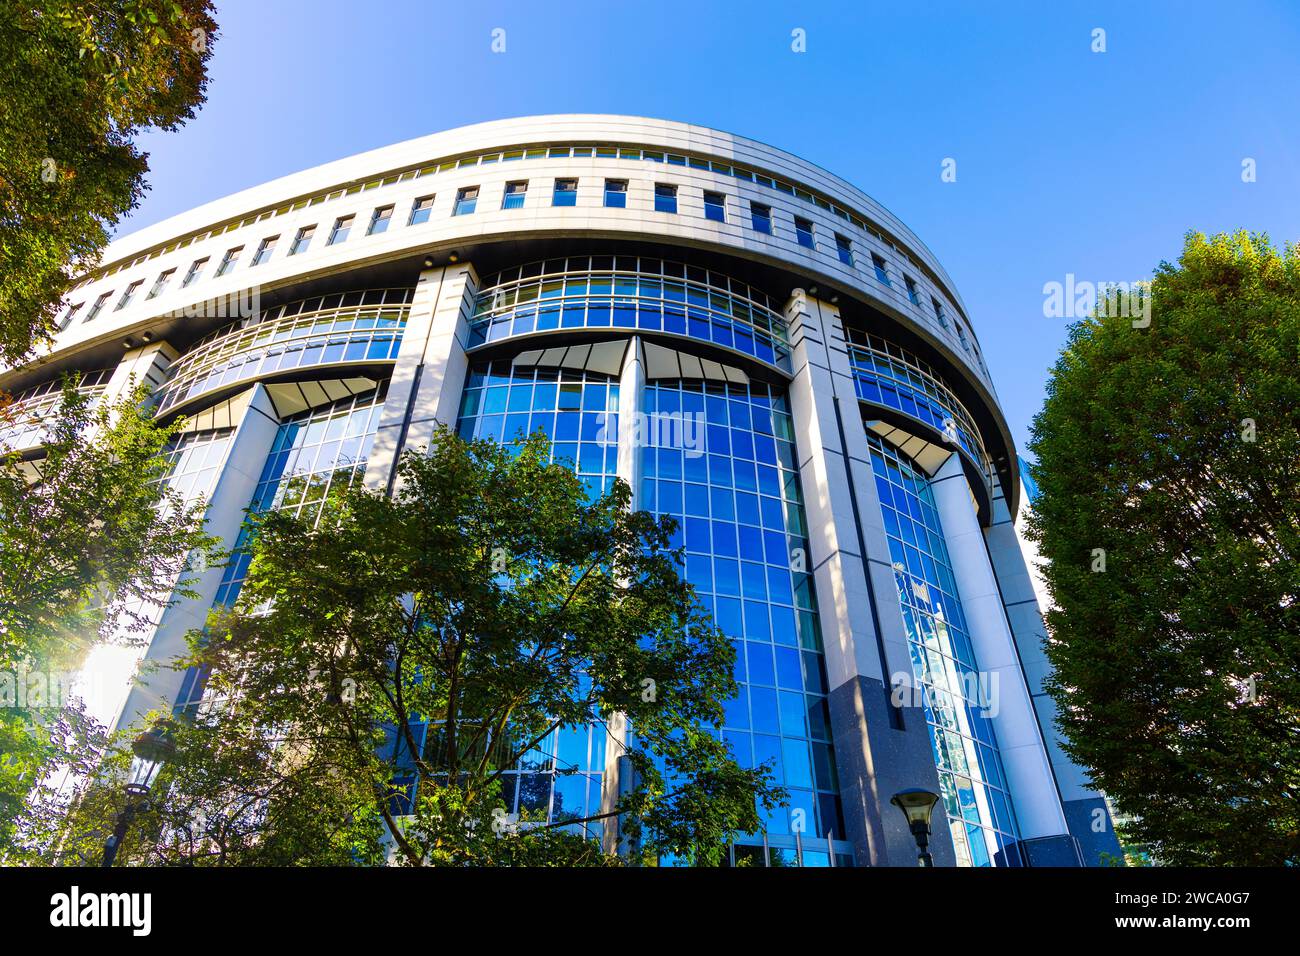 Paul Henri Spaak European Parliament building containing the hemicycle at Espace Léopold, European Parliament building, Brussels, Belgium Stock Photo